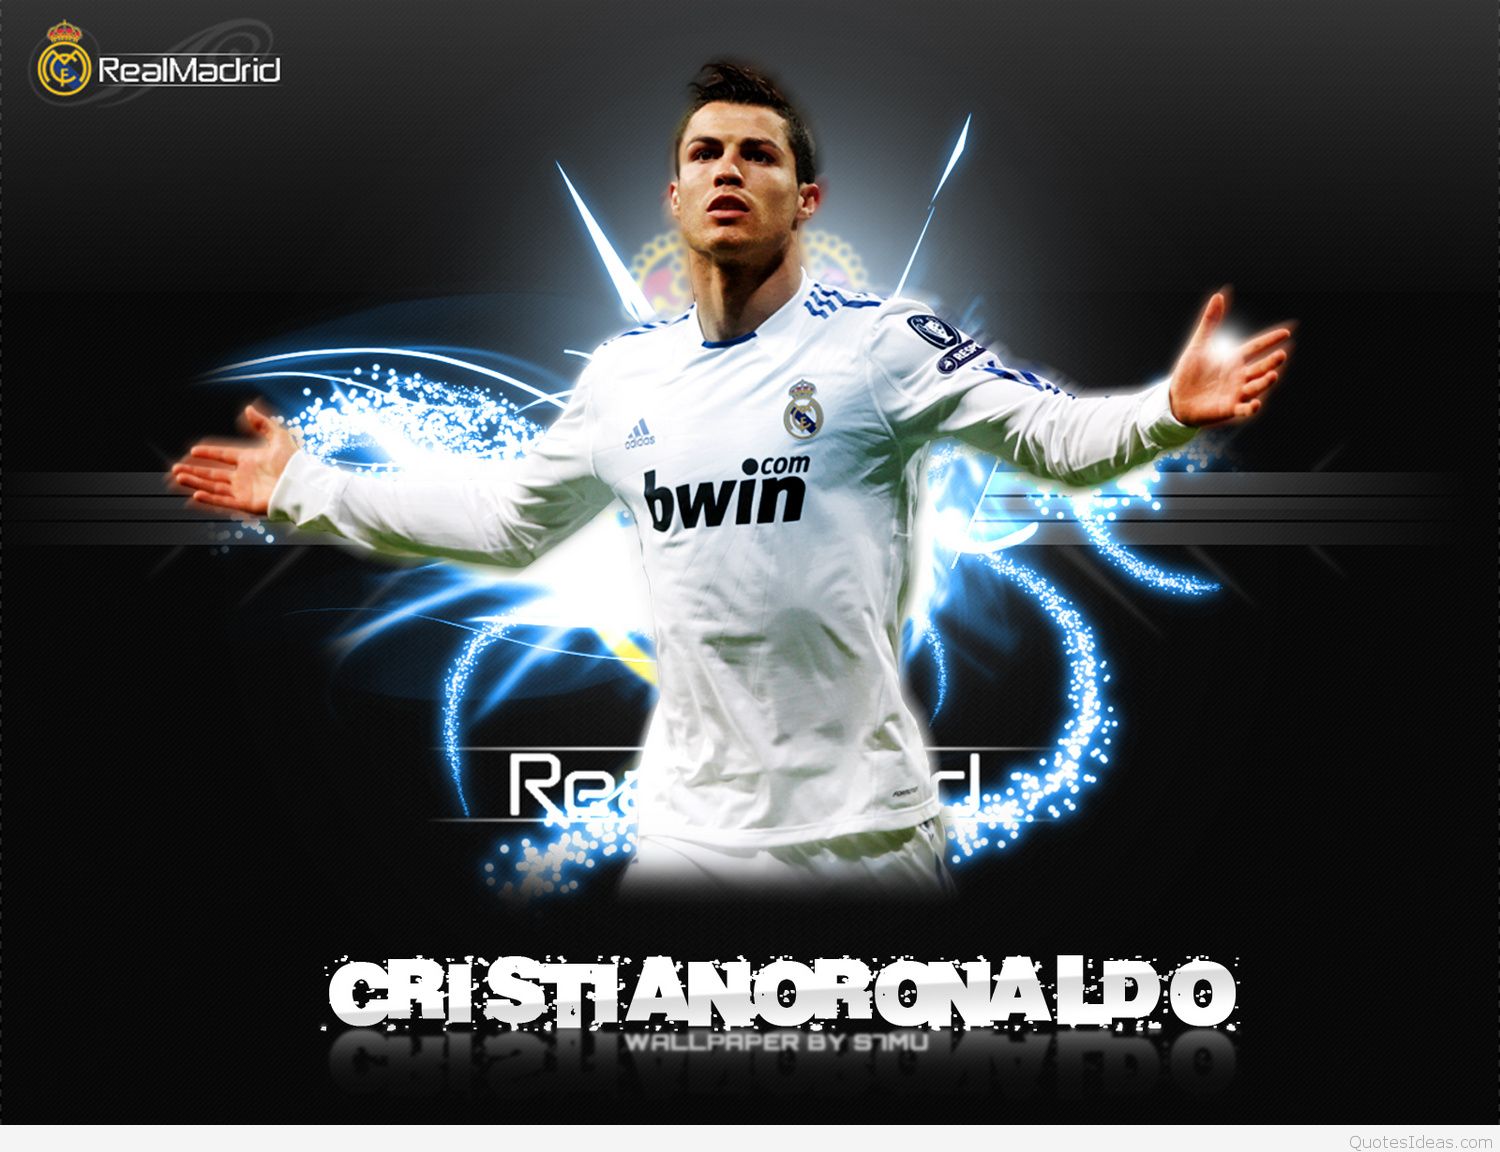 cool real madrid wallpaper,football player,soccer player,player,font,poster